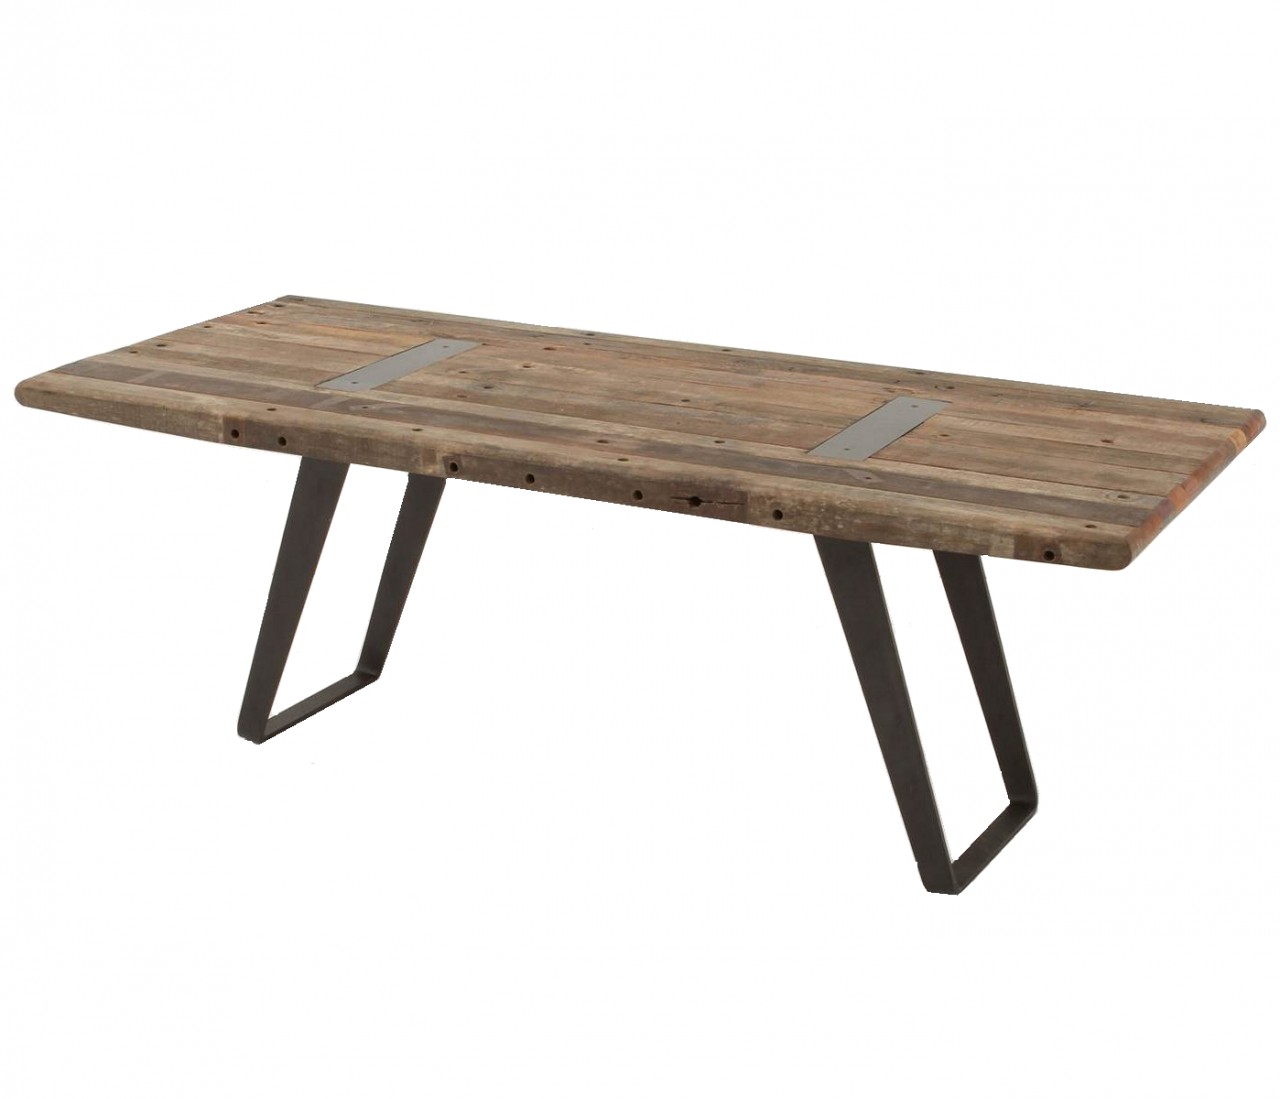 Rustic salvaged wood dining tables with black iron legs finished